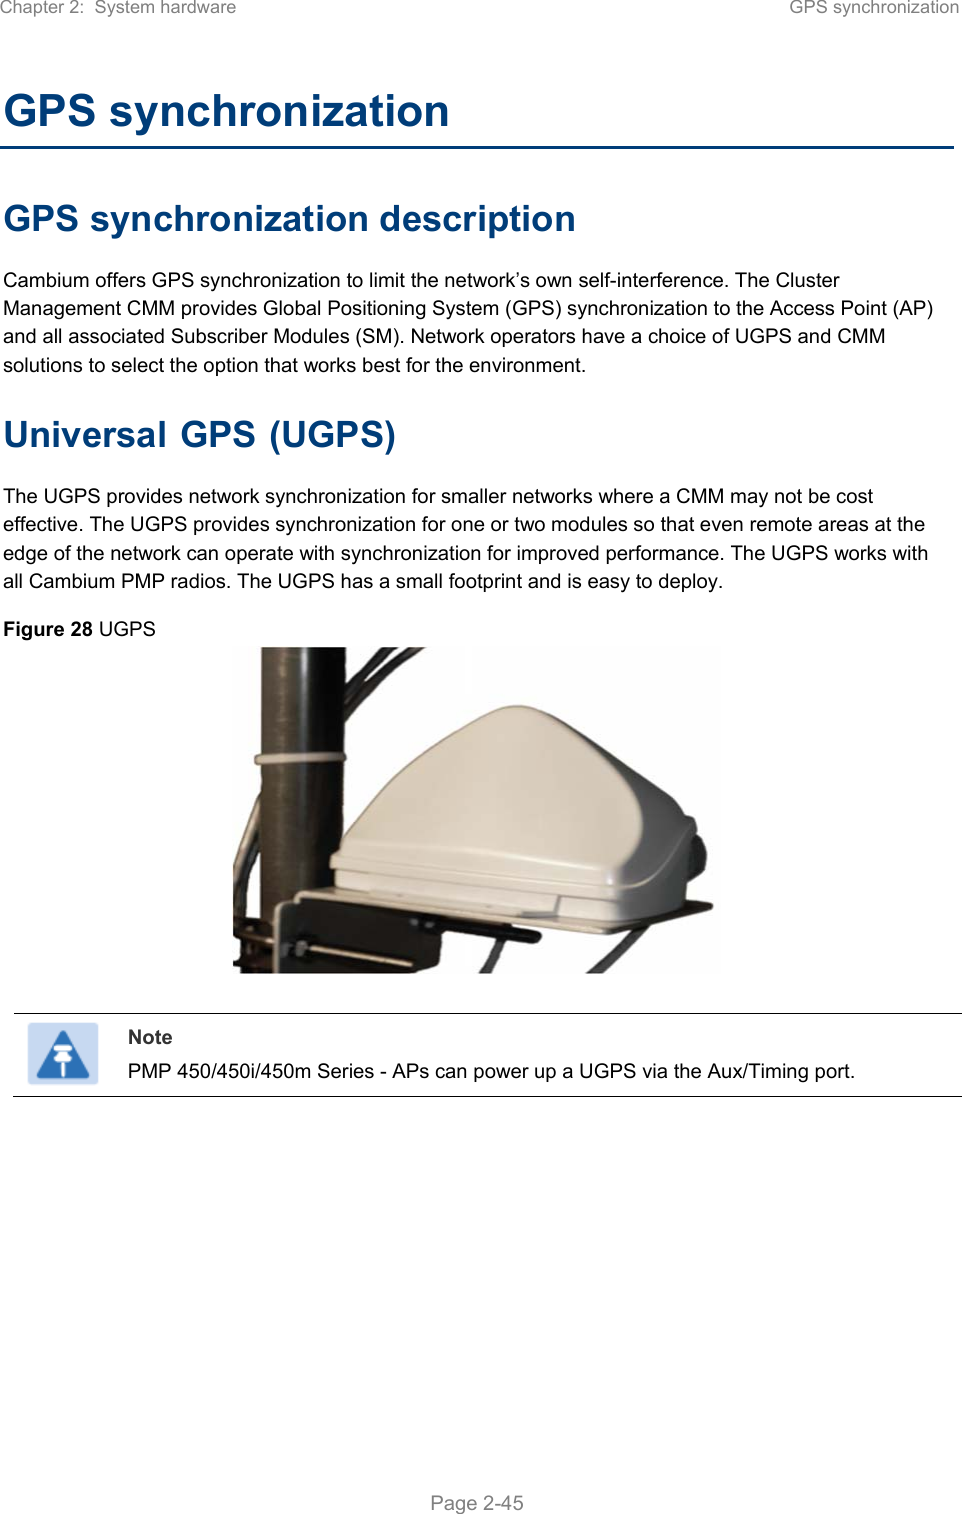 Chapter 2:  System hardware  GPS synchronization   Page 2-45 GPS synchronization GPS synchronization description Cambium offers GPS synchronization to limit the network’s own self-interference. The Cluster Management CMM provides Global Positioning System (GPS) synchronization to the Access Point (AP) and all associated Subscriber Modules (SM). Network operators have a choice of UGPS and CMM solutions to select the option that works best for the environment. Universal GPS (UGPS) The UGPS provides network synchronization for smaller networks where a CMM may not be cost effective. The UGPS provides synchronization for one or two modules so that even remote areas at the edge of the network can operate with synchronization for improved performance. The UGPS works with all Cambium PMP radios. The UGPS has a small footprint and is easy to deploy. Figure 28 UGPS    Note PMP 450/450i/450m Series - APs can power up a UGPS via the Aux/Timing port.    